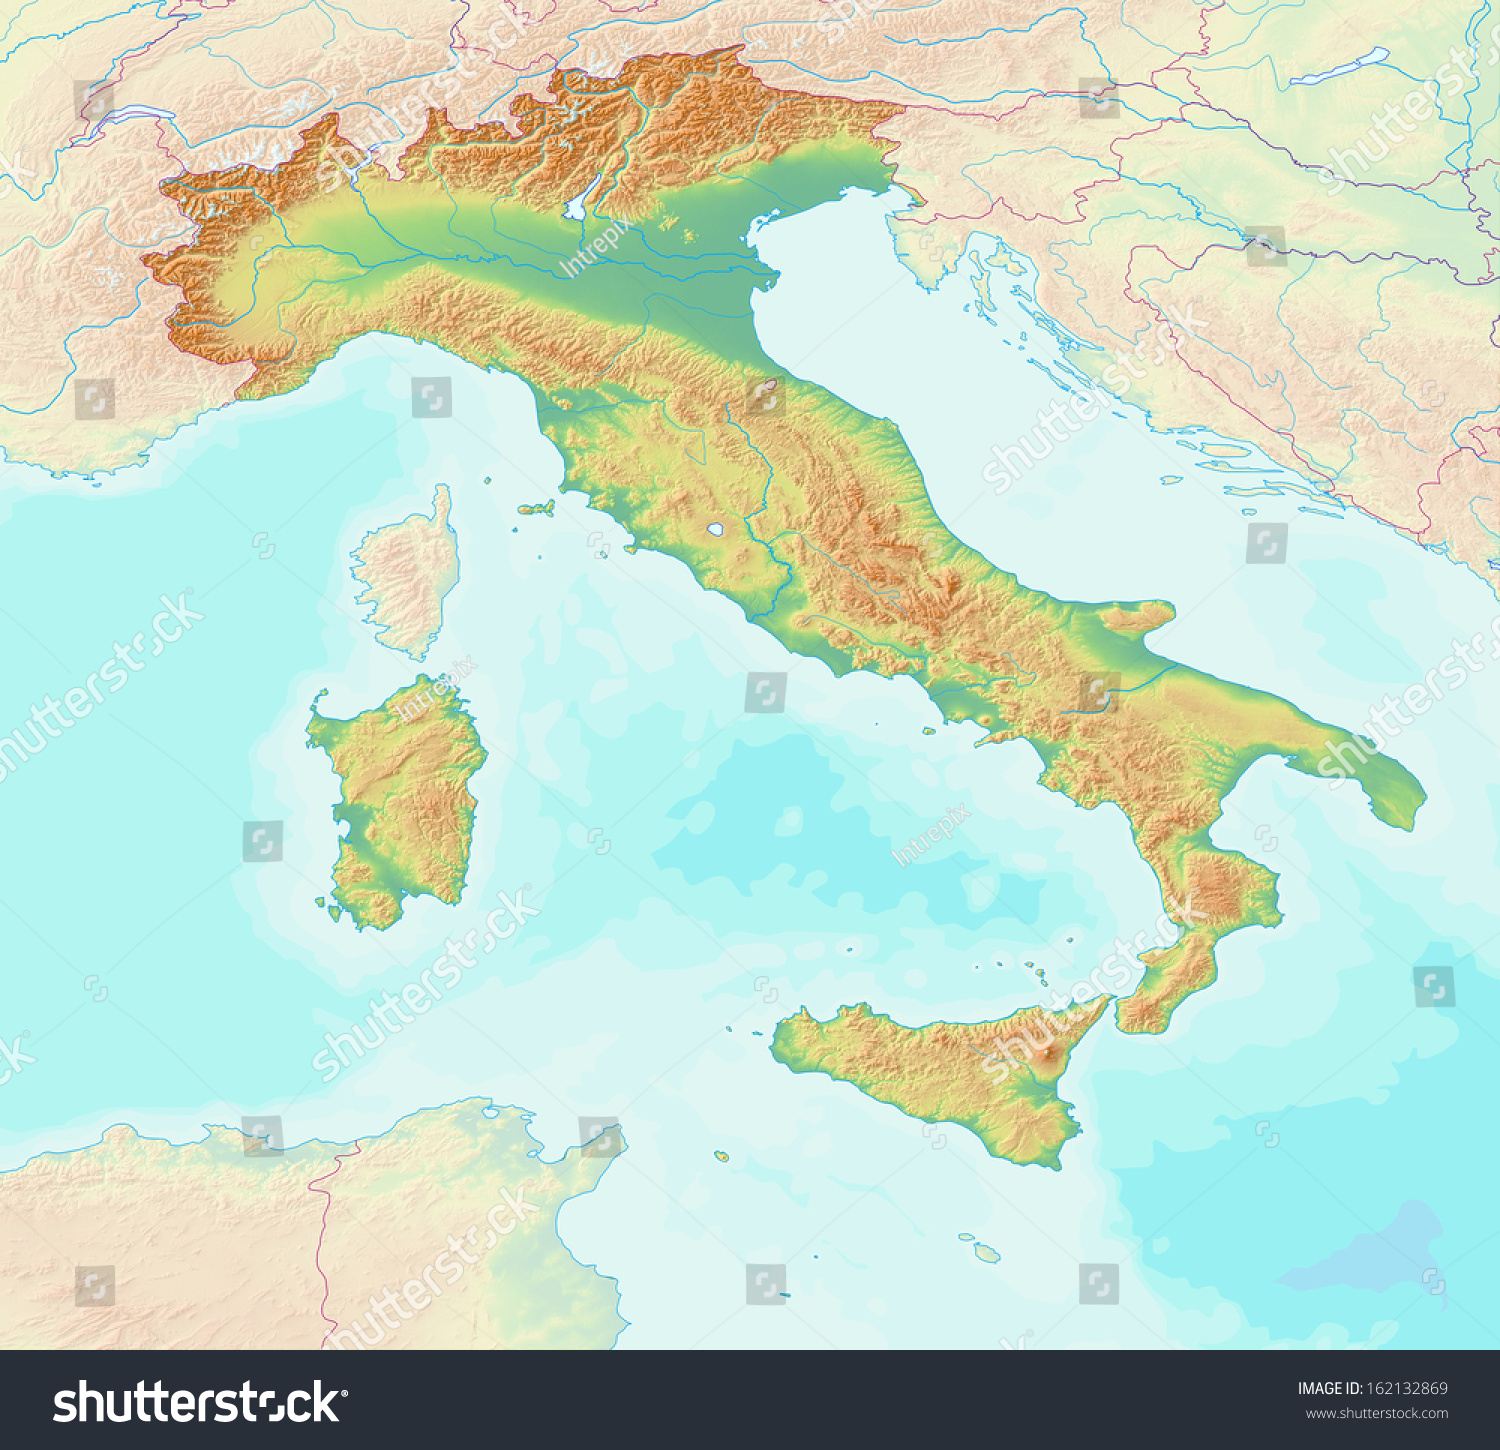 Map Showing Topography Italy Without Labels Stock Photo Edit Now